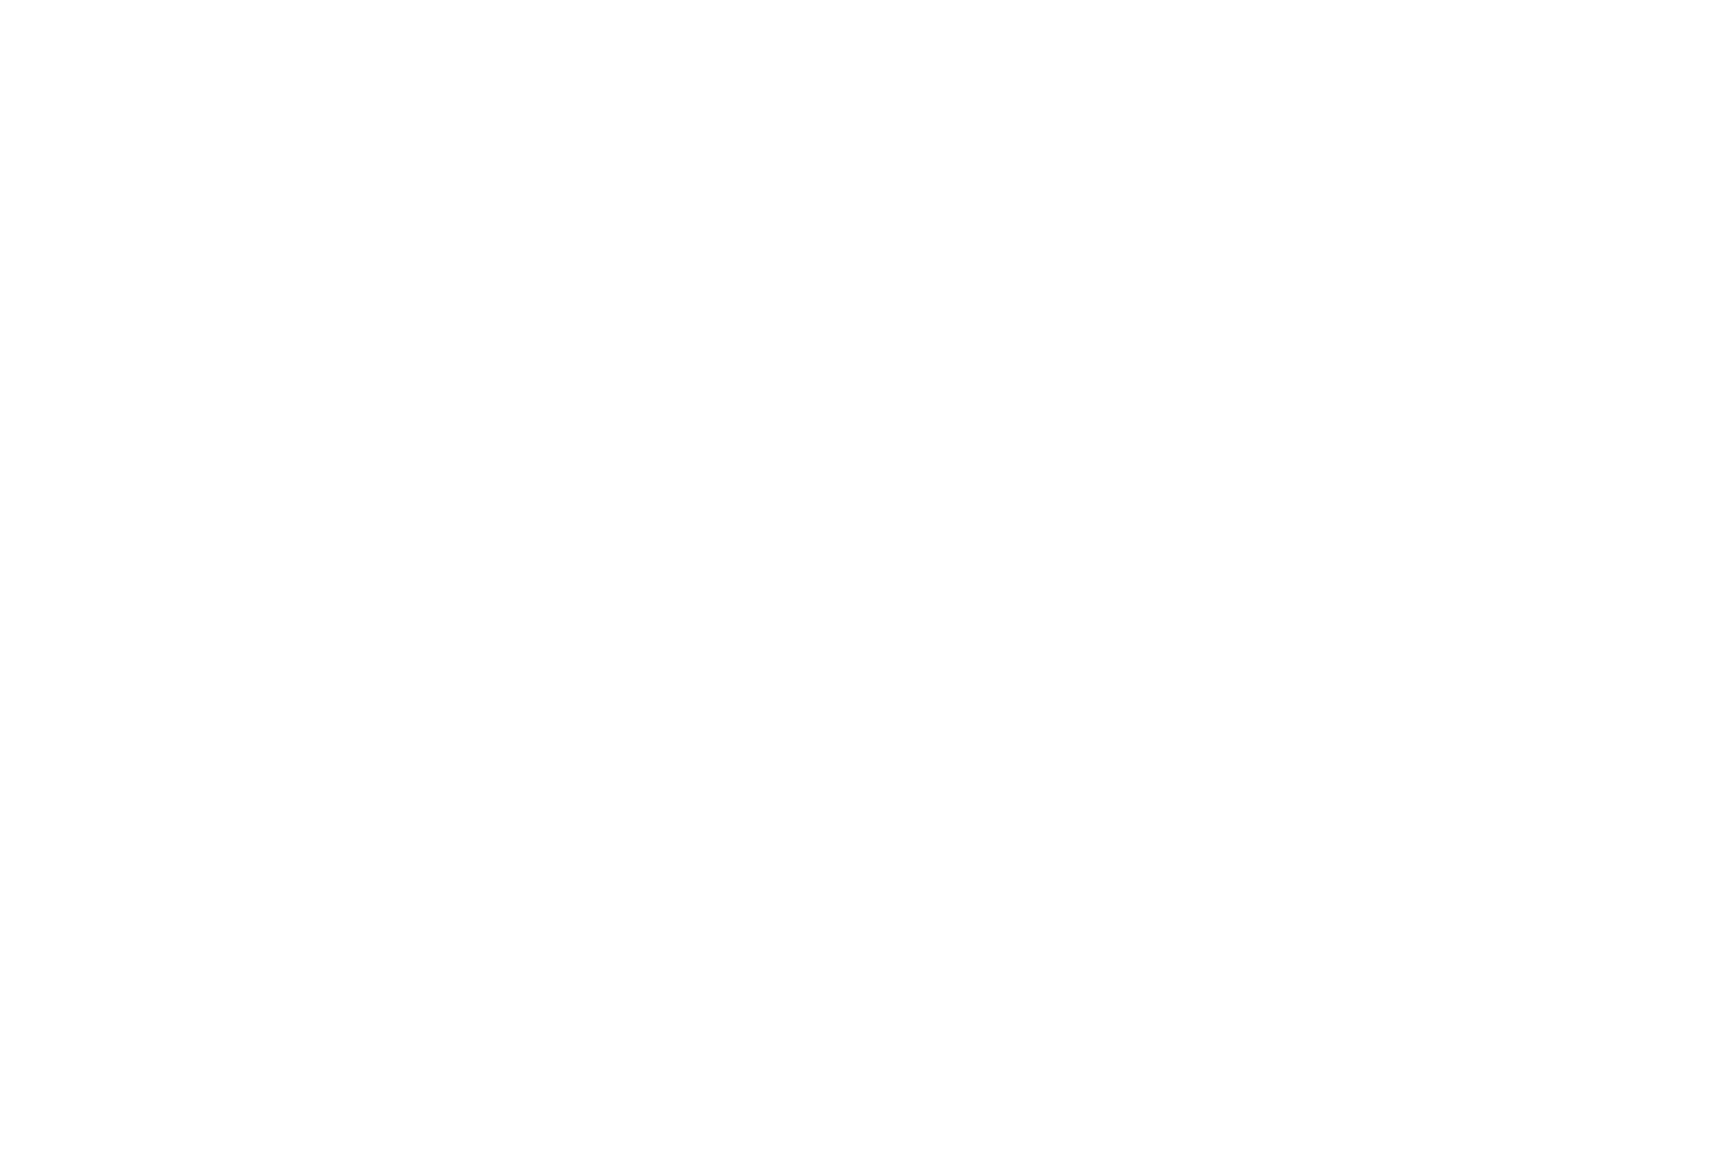 OFFICIAL SELECTION - THE BRIGHTSIDE TAVERN SHORTS FILM FEST - 2017 (1).png